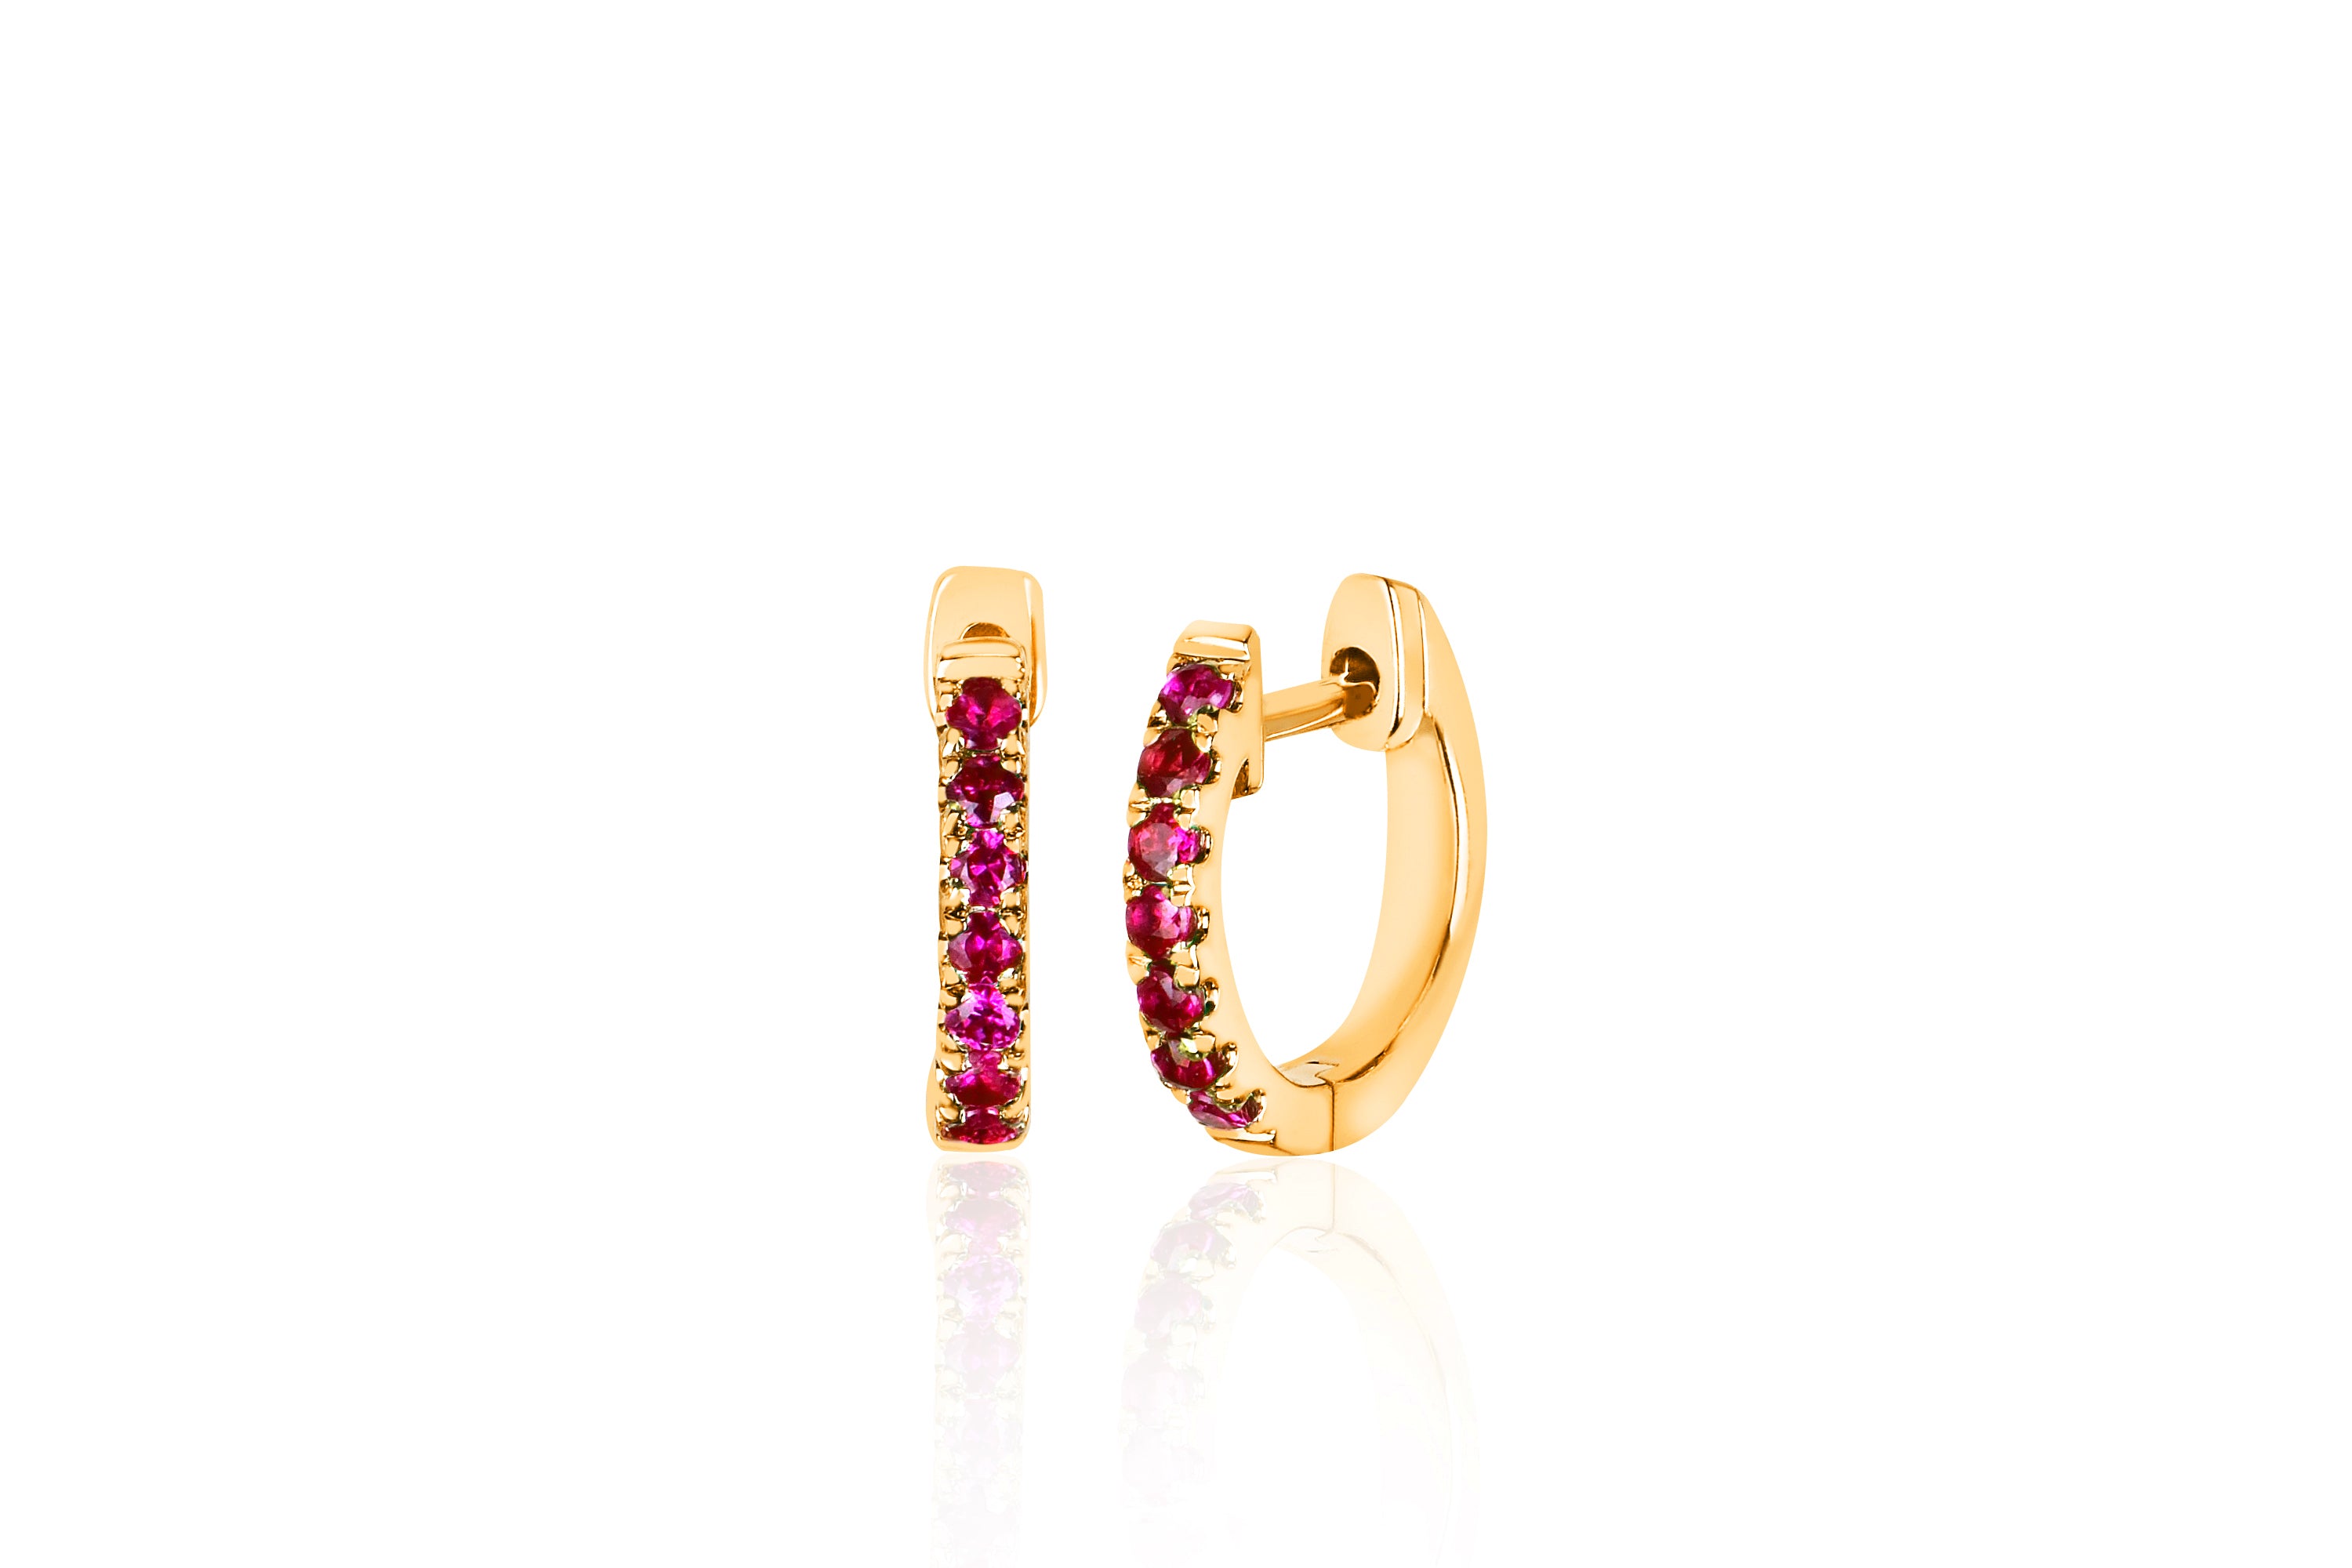 14k (karat) yellow gold huggie earrings measuring 10 mm in height with precious ruby stones measuring 1.5 mm in width set in the front.